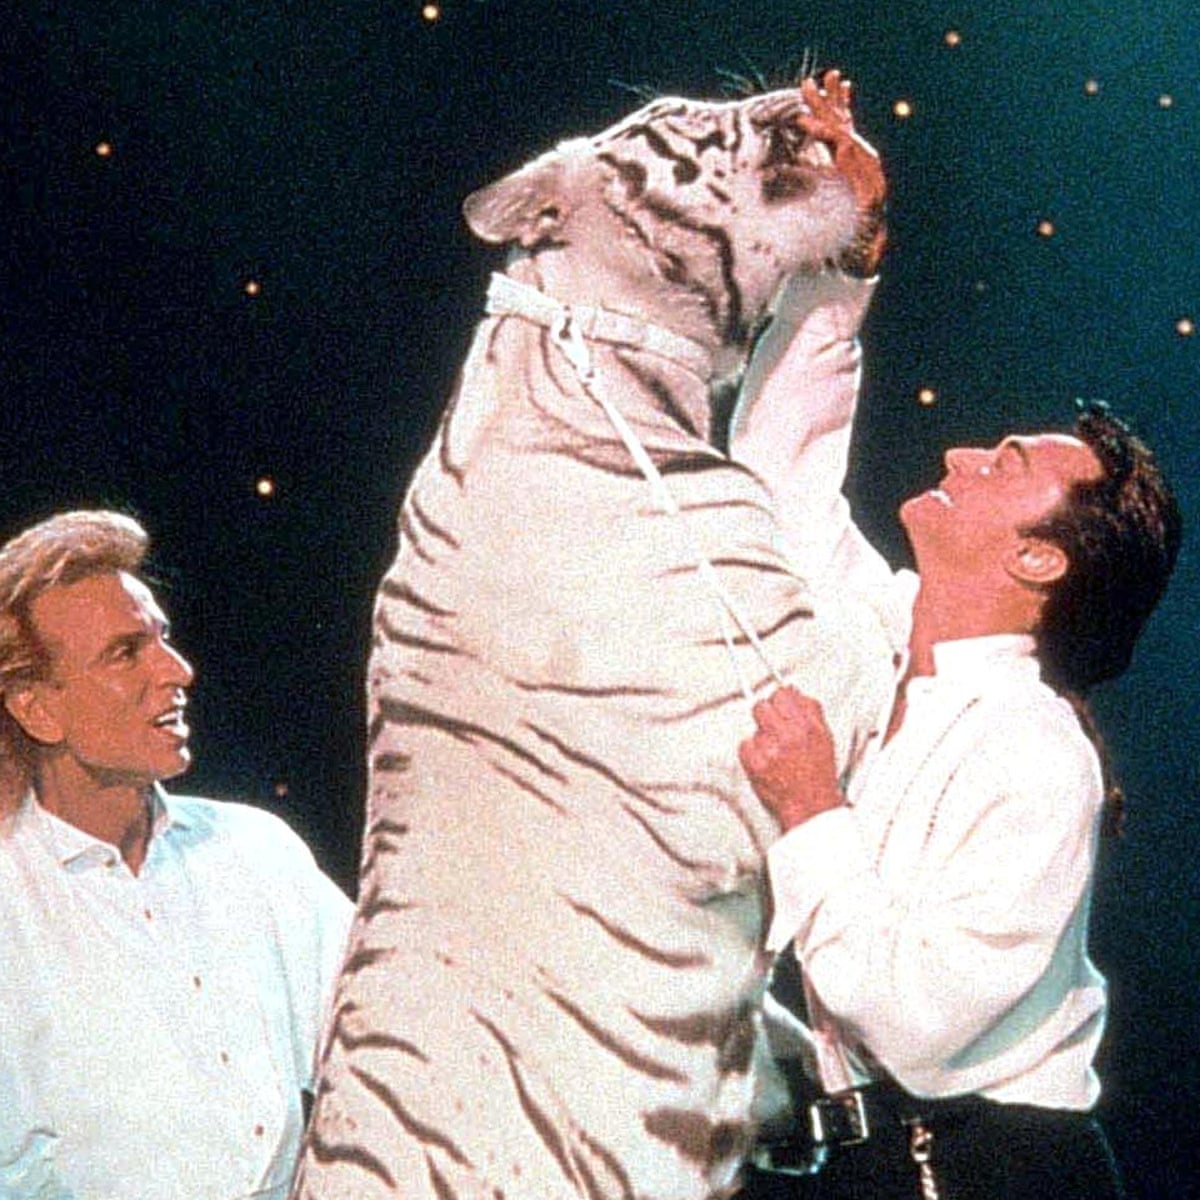 It took four men and a fire extinguisher to get the tiger off him': the  tragedy of Vegas magicians Siegfried and Roy | Podcasts | The Guardian